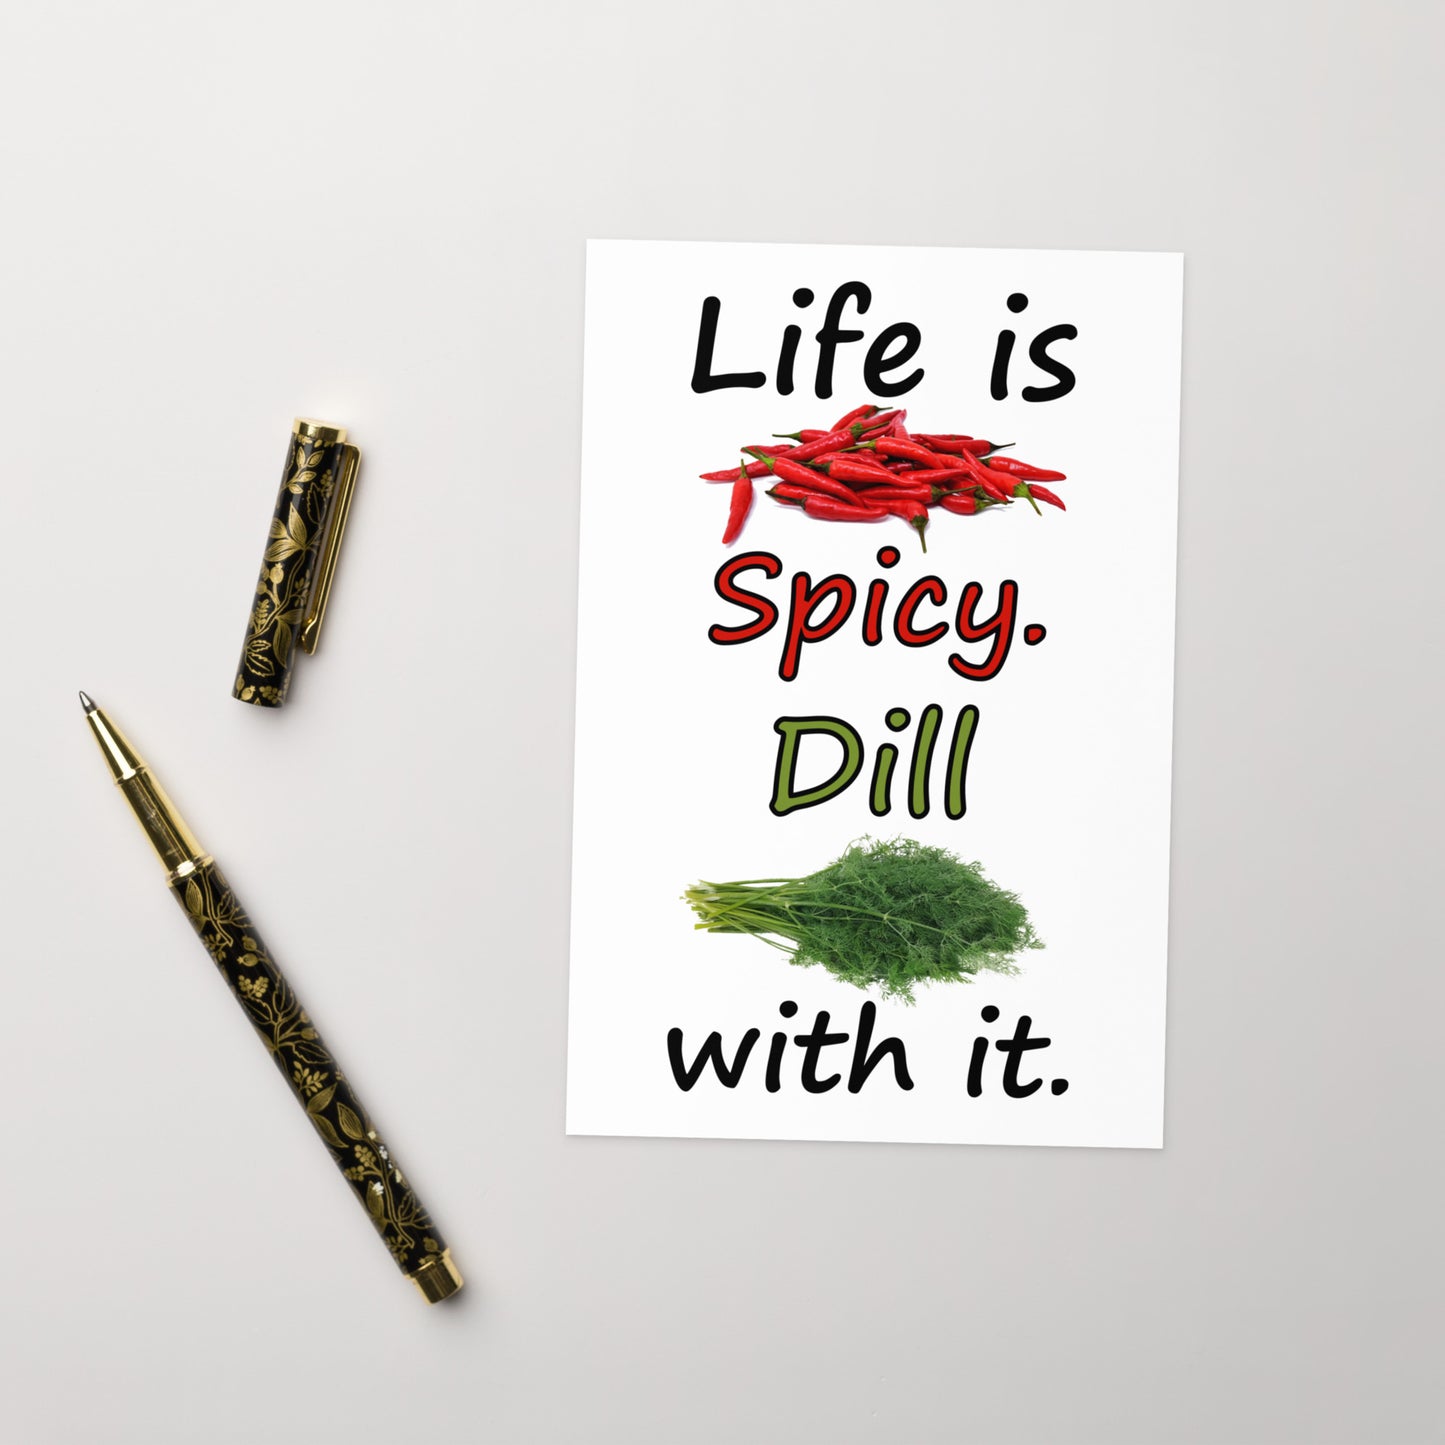 4 by 6 inch Life Is Spicy greeting card. Features Life is Spicy, Dill With It text, with image of chili peppers and dill weed on the front. The inside is blank. Comes with a white envelope. Card is made of durable paperboard with vibrant printing. Shown on tabletop next to ballpoint pen.